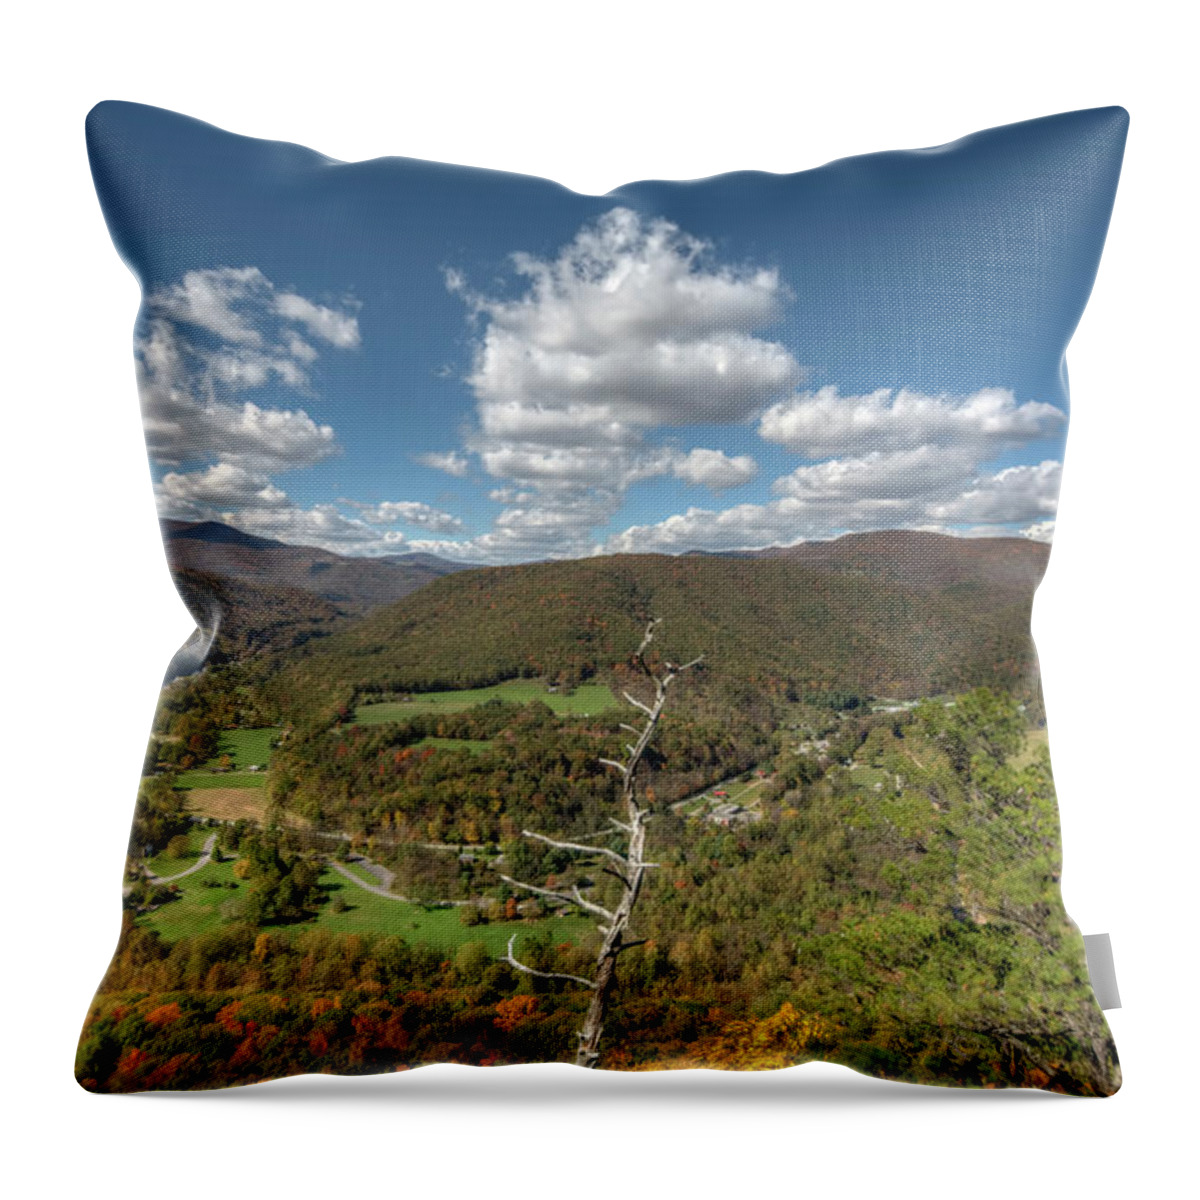 West Throw Pillow featuring the photograph Seneca Rocks Overlook #1 by Carolyn Hutchins